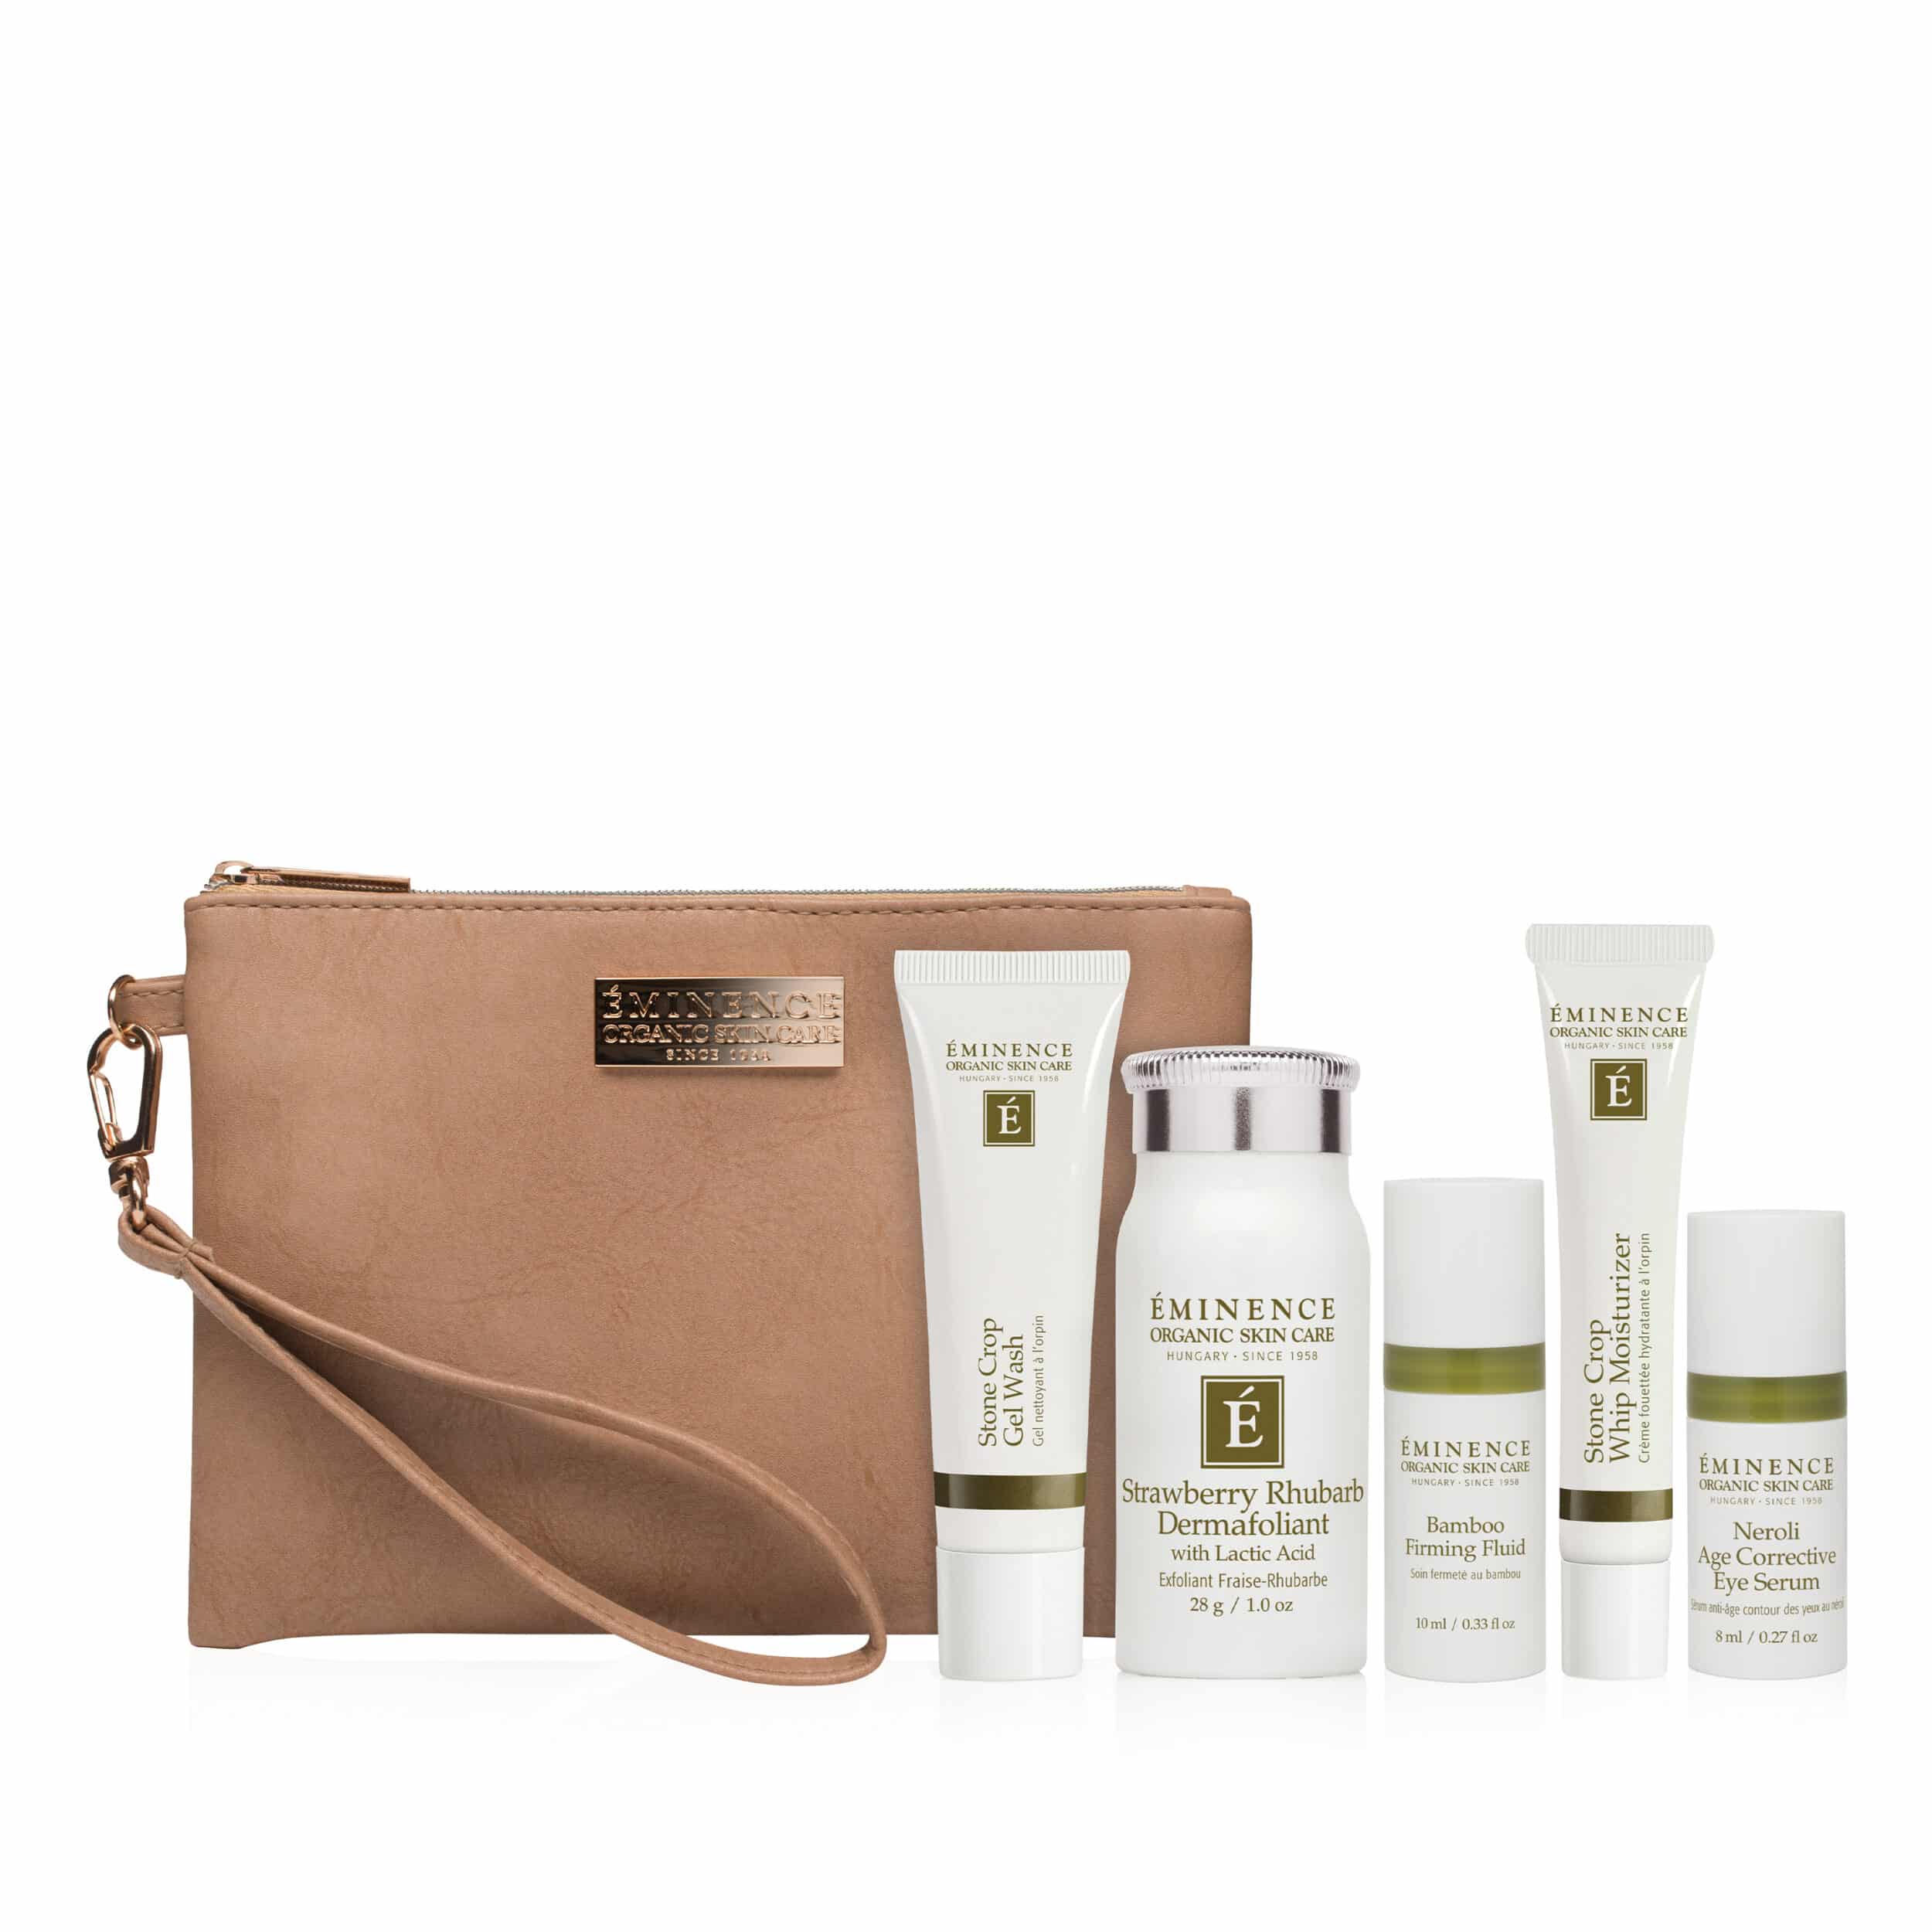 Eminence Organics Must Have Minis Collection bag with products SQ